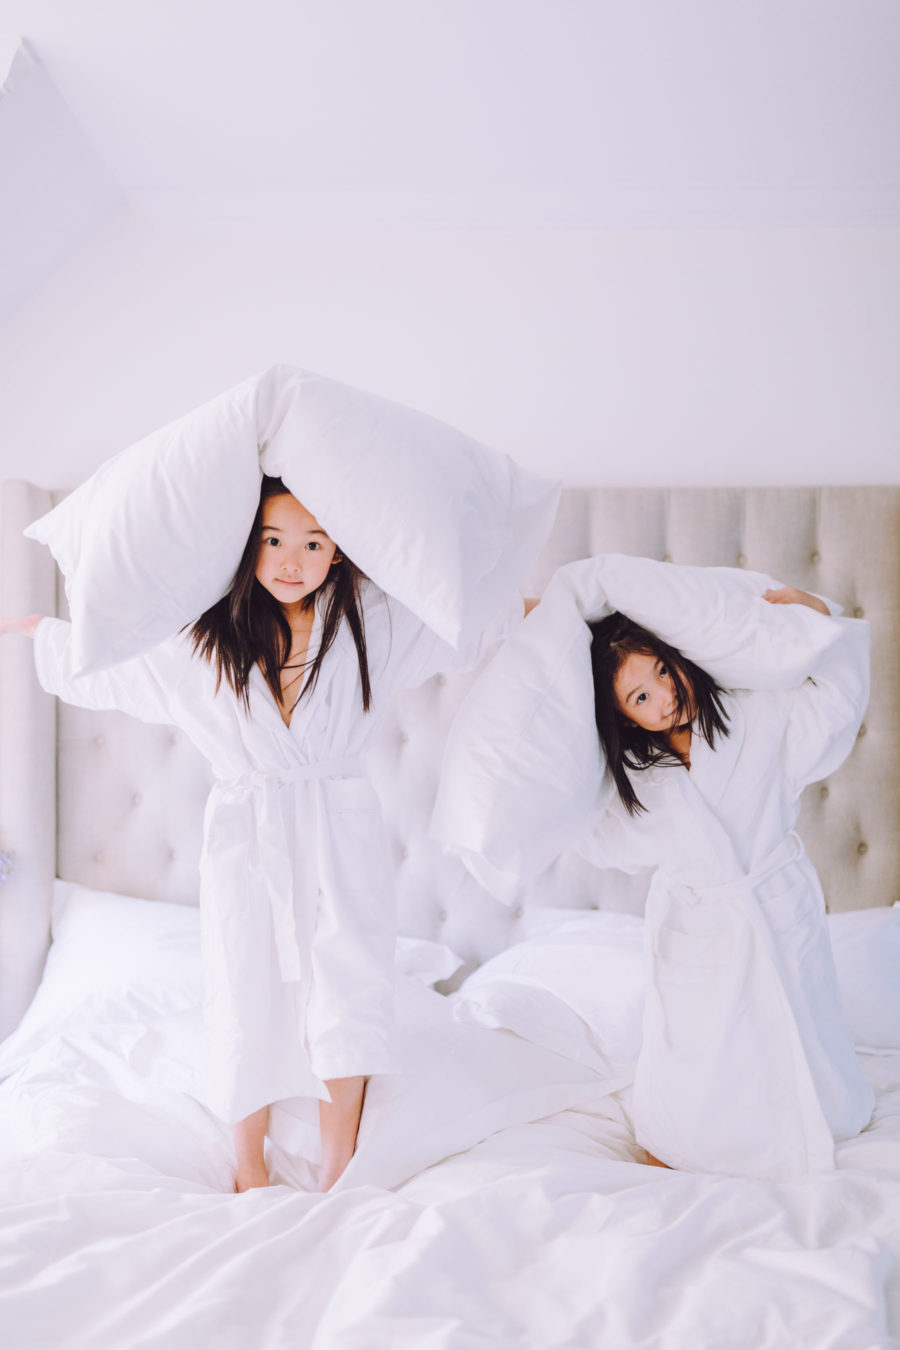 jessica wang makes bedroom feel like a 5-star hotel with four seasons at home bedding // Notjessfashion.com